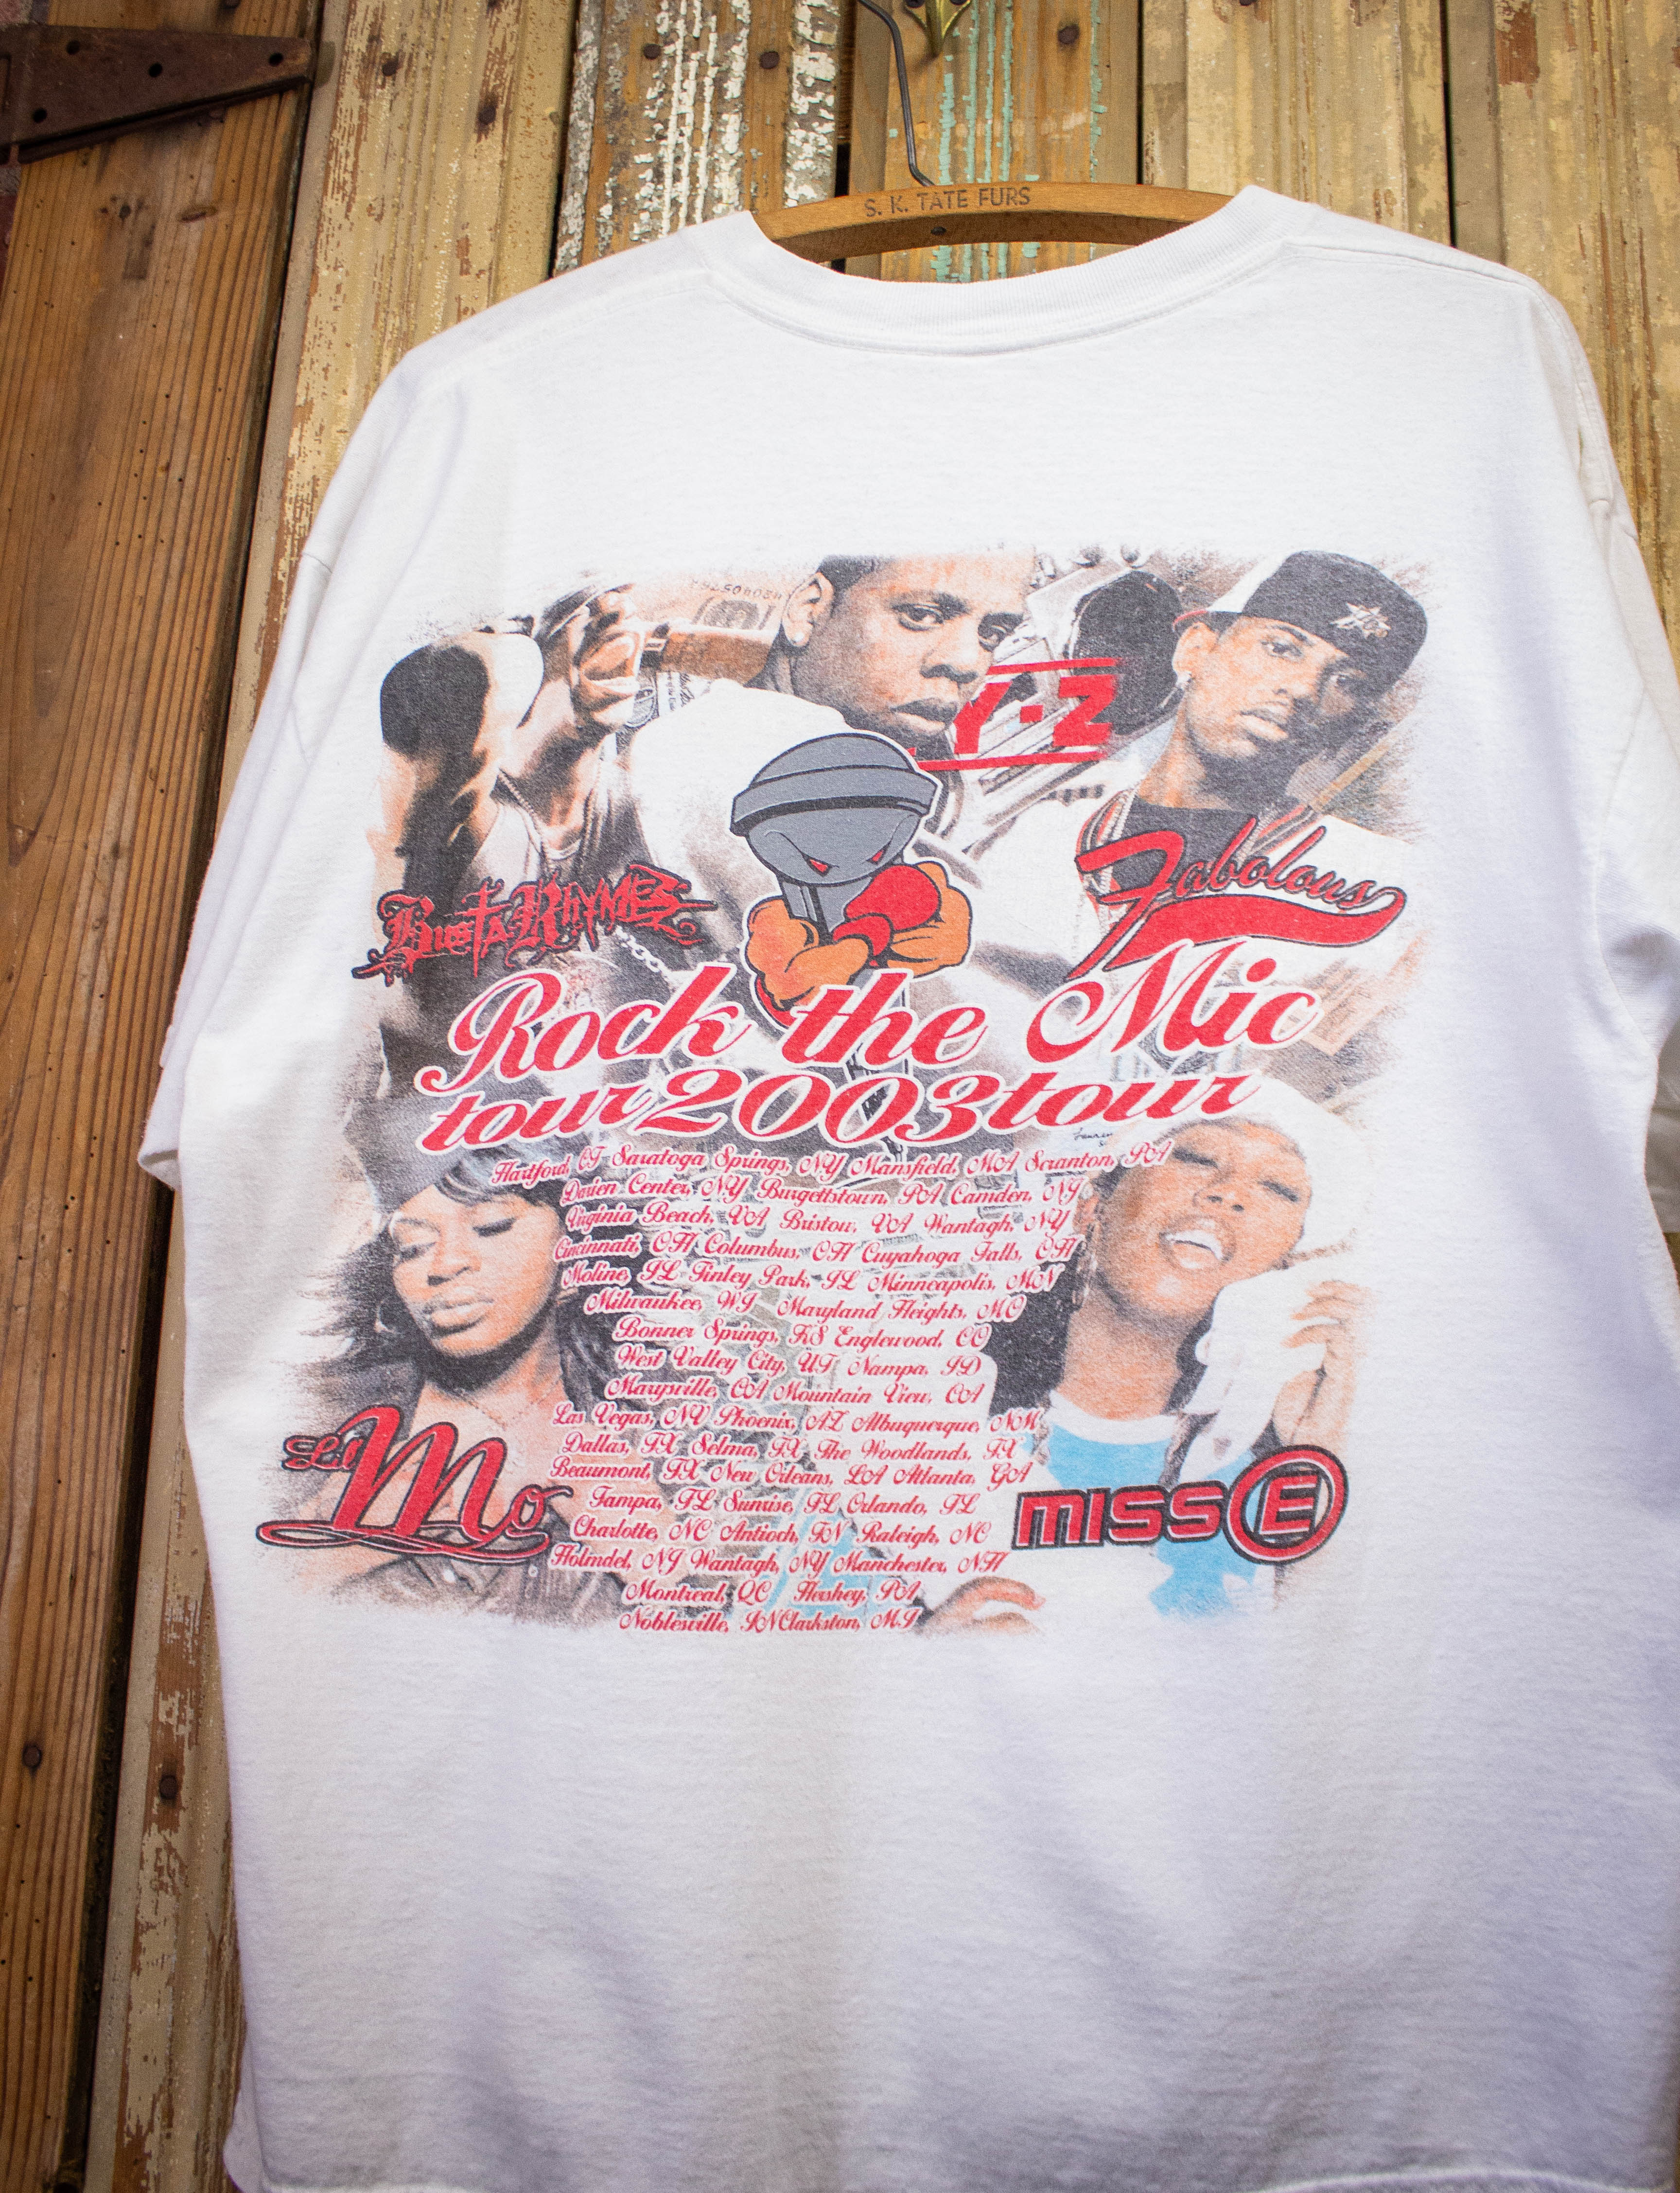 ROCK THE MIC 2003 Tシャツ JAY-Z 50cent - トップス